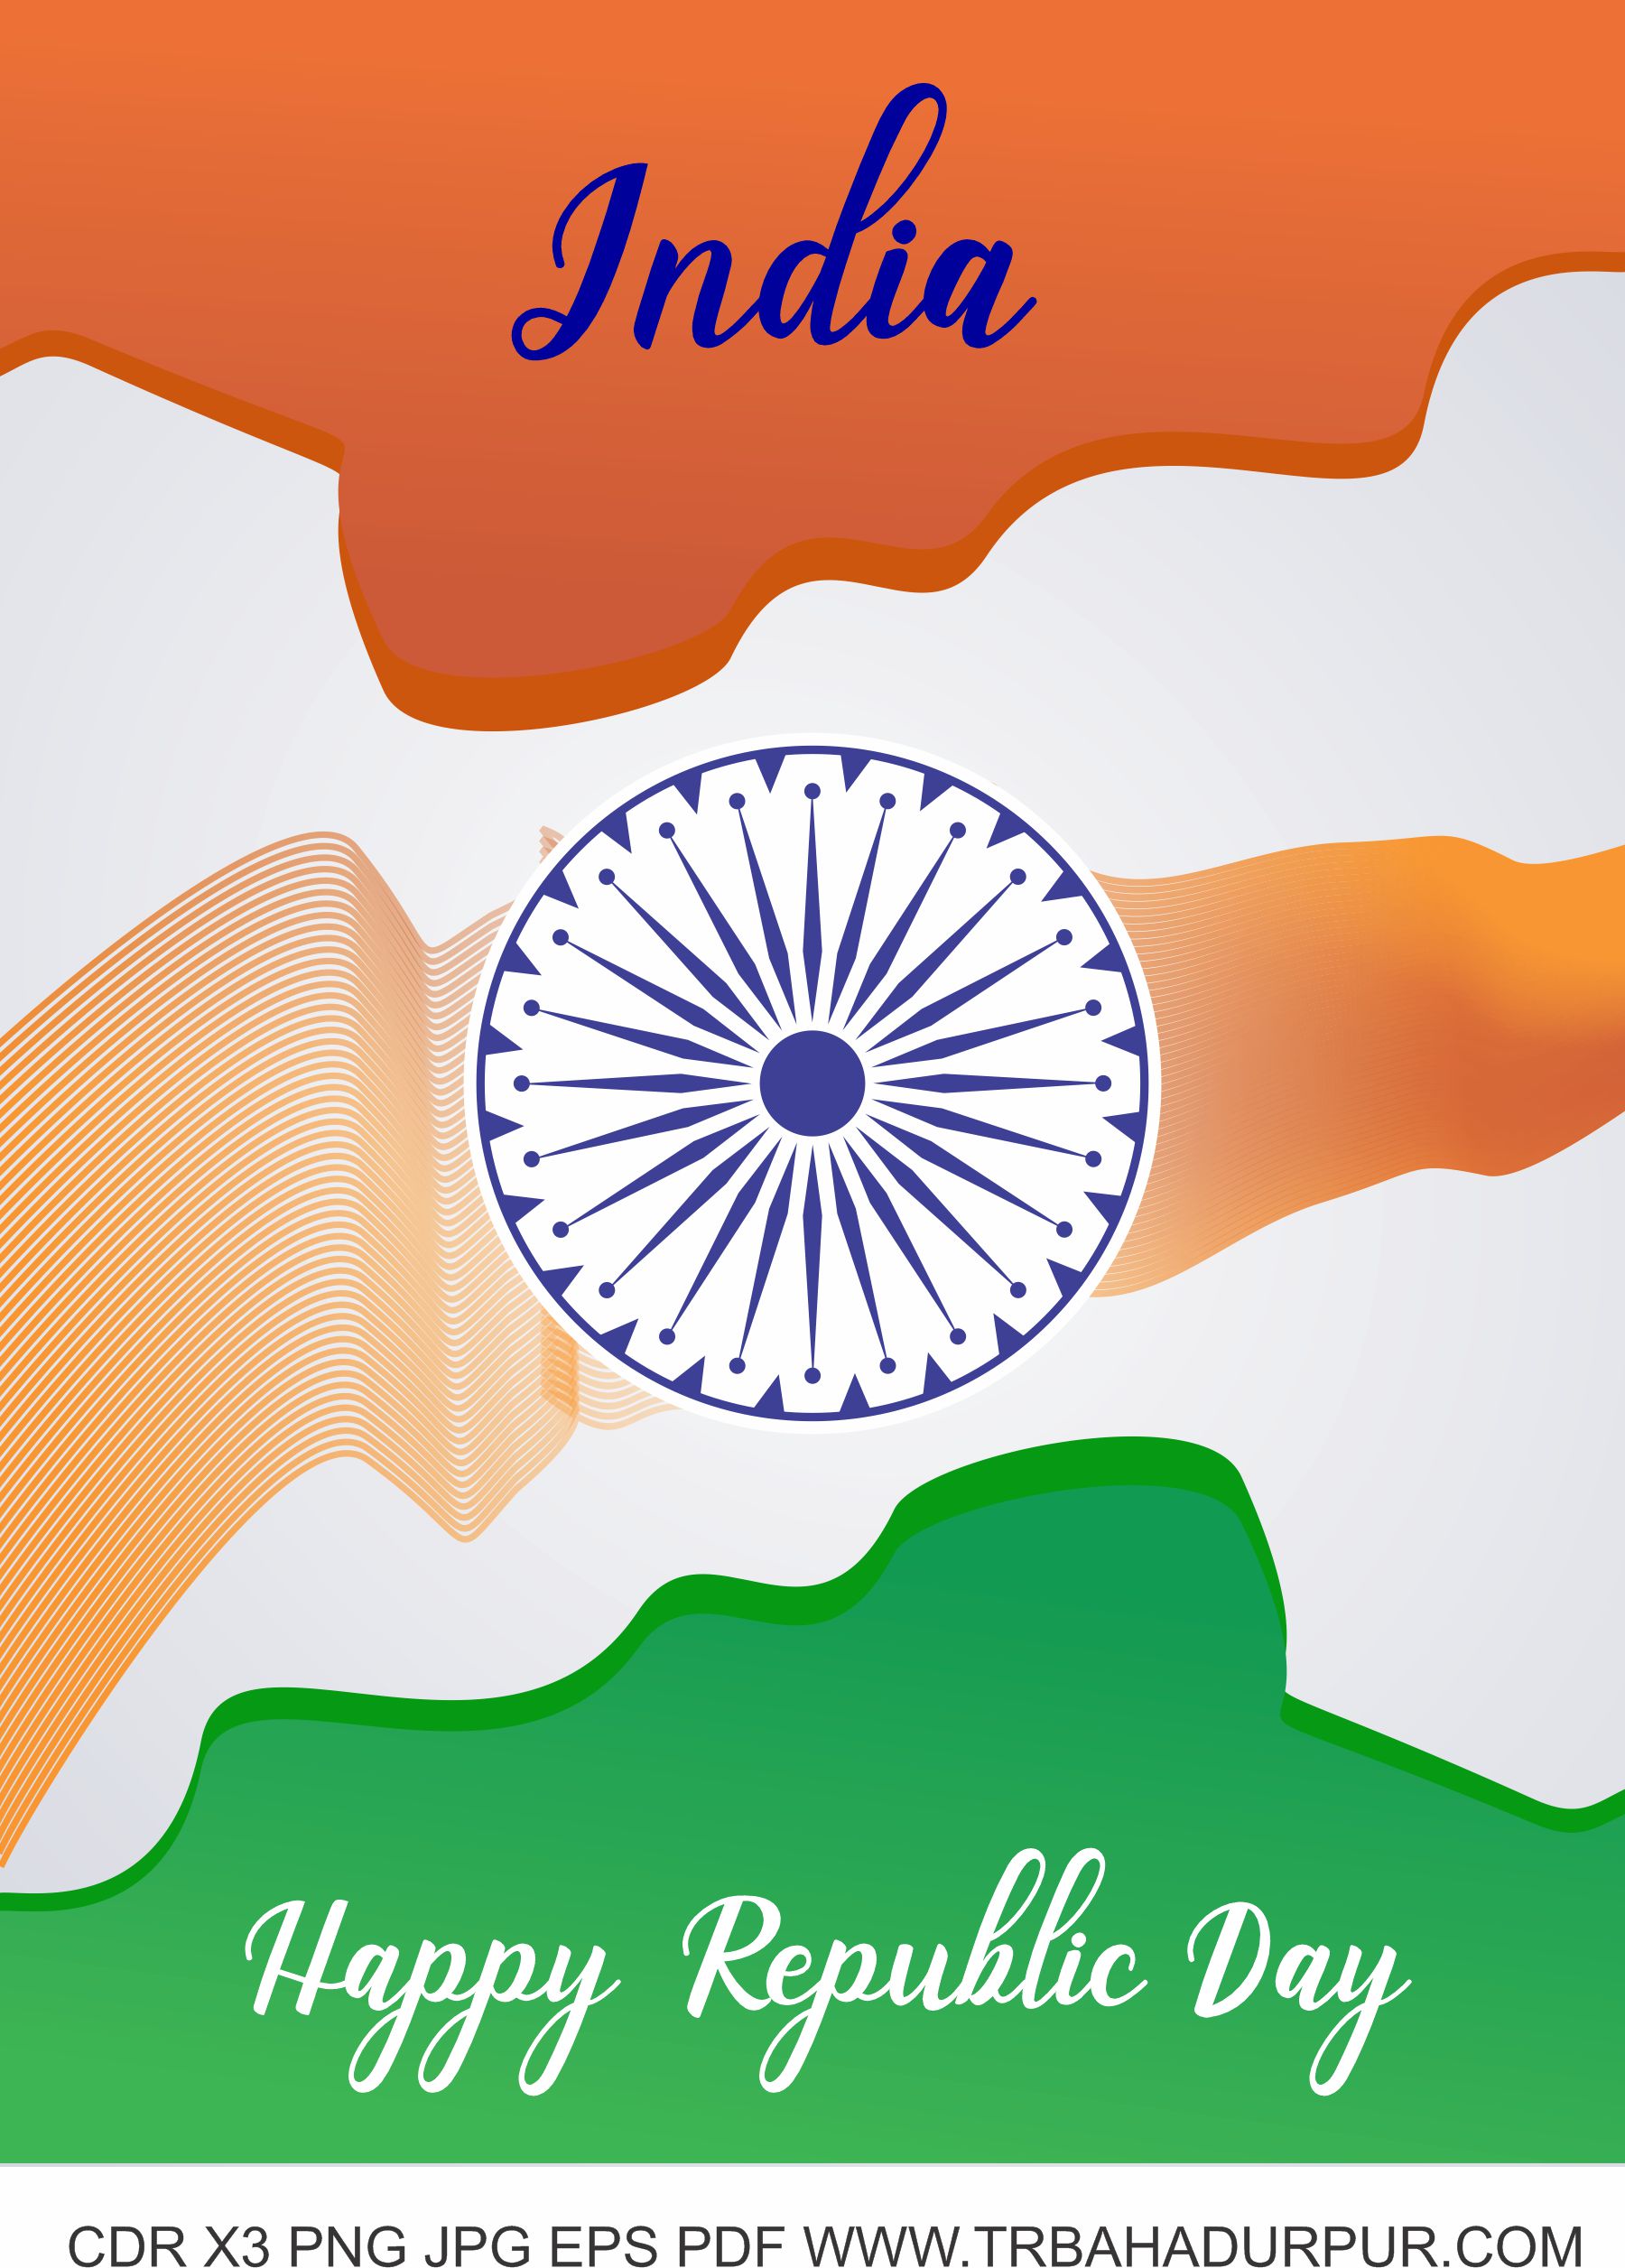 Republic Day Clipart PNG Images Flat Design Indian Republic Day Wallpaper  Taj Republic Day Indian Patriotism PNG Image For Free Download